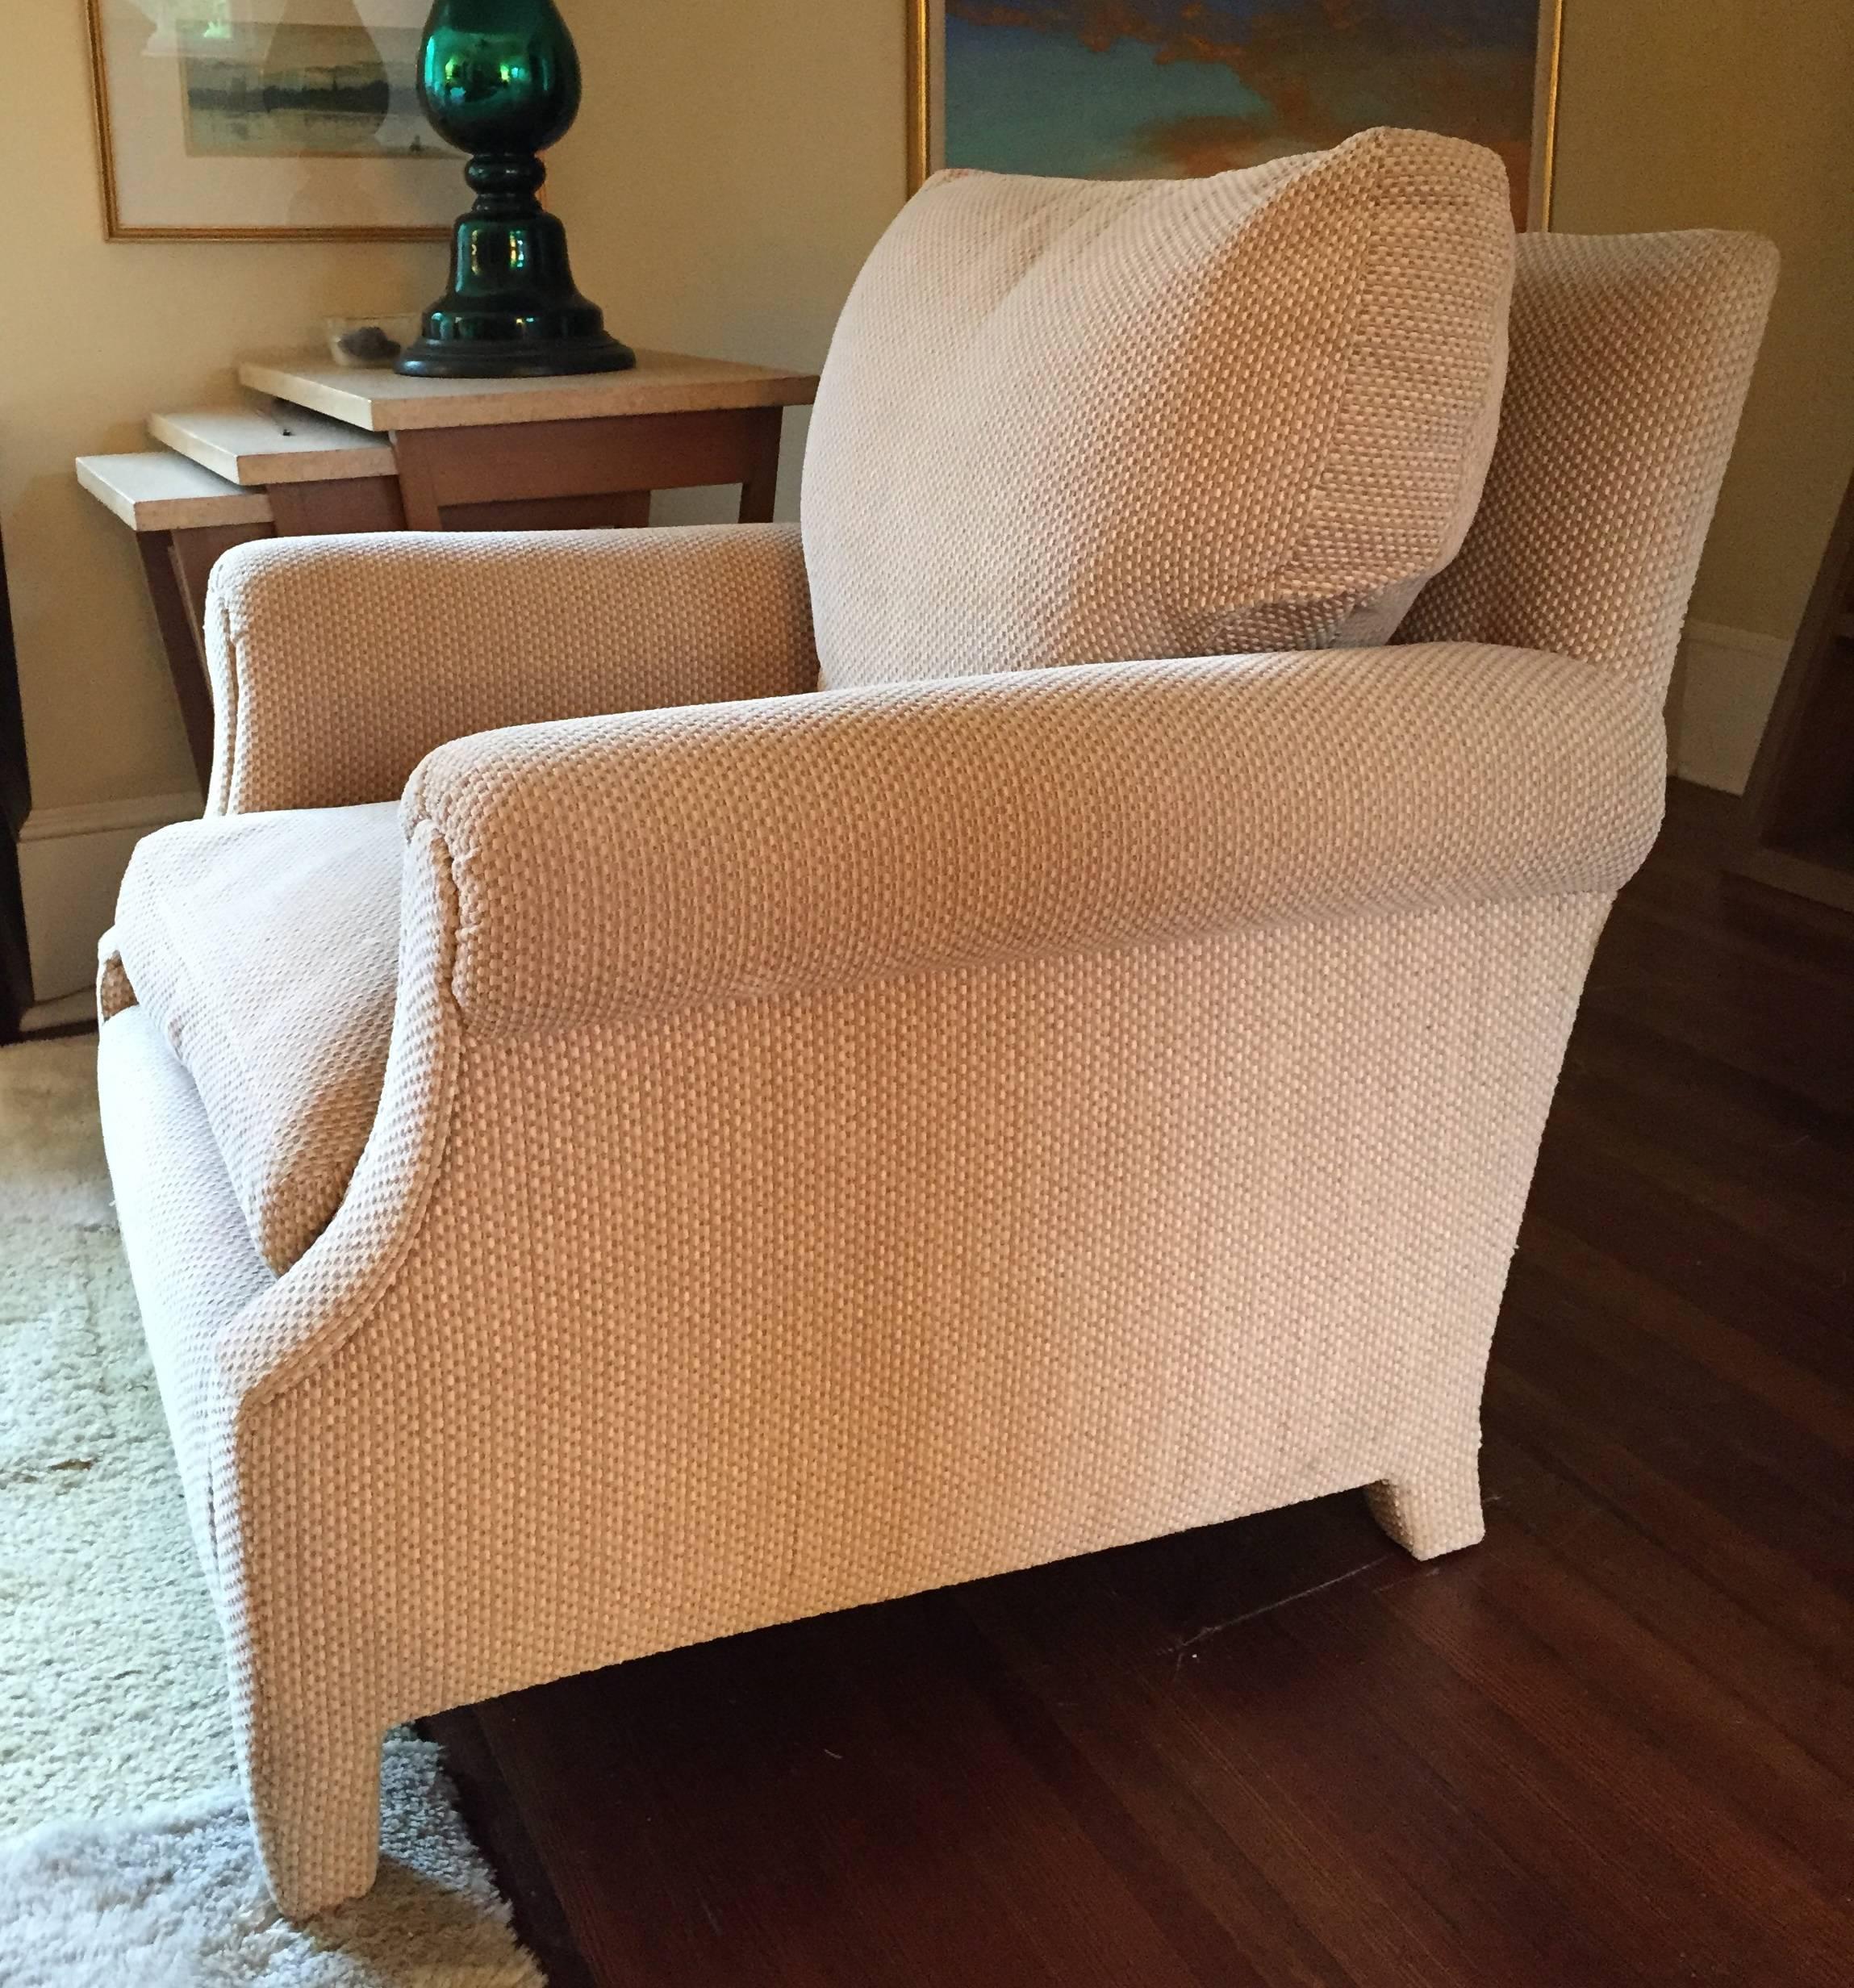 These chairs have a compact footprint, but are very comfortable due to the plush down seat and back cushions. In addition to the dimensions listed below, the arm height is 24 inches.

They have an interesting provenance: They are from the estate of